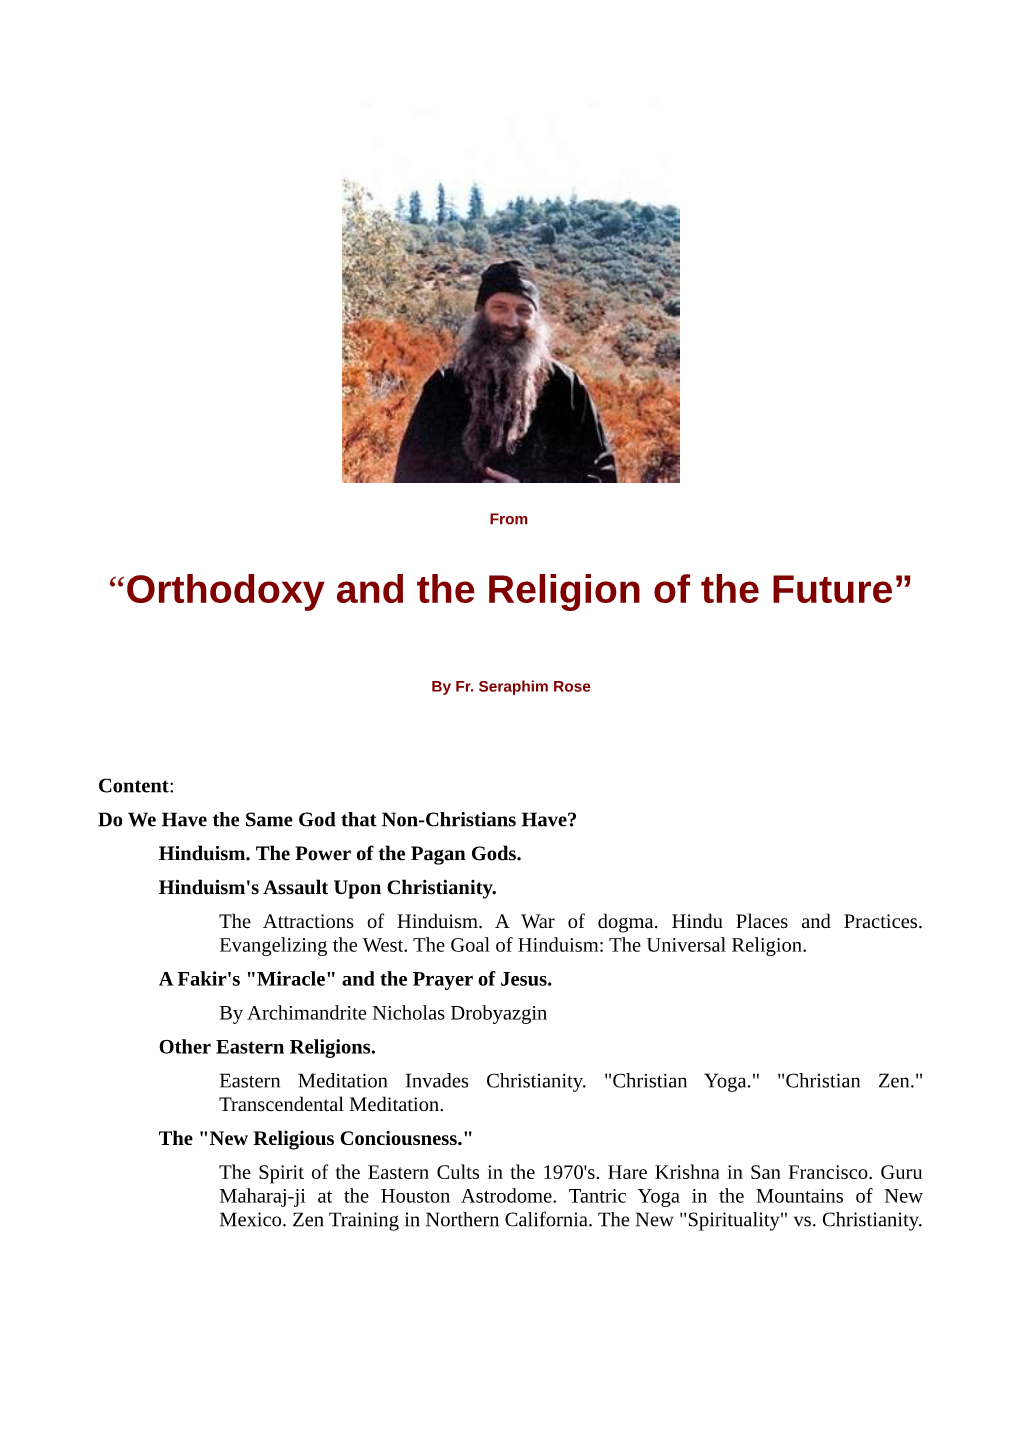 “Orthodoxy and the Religion of the Future”